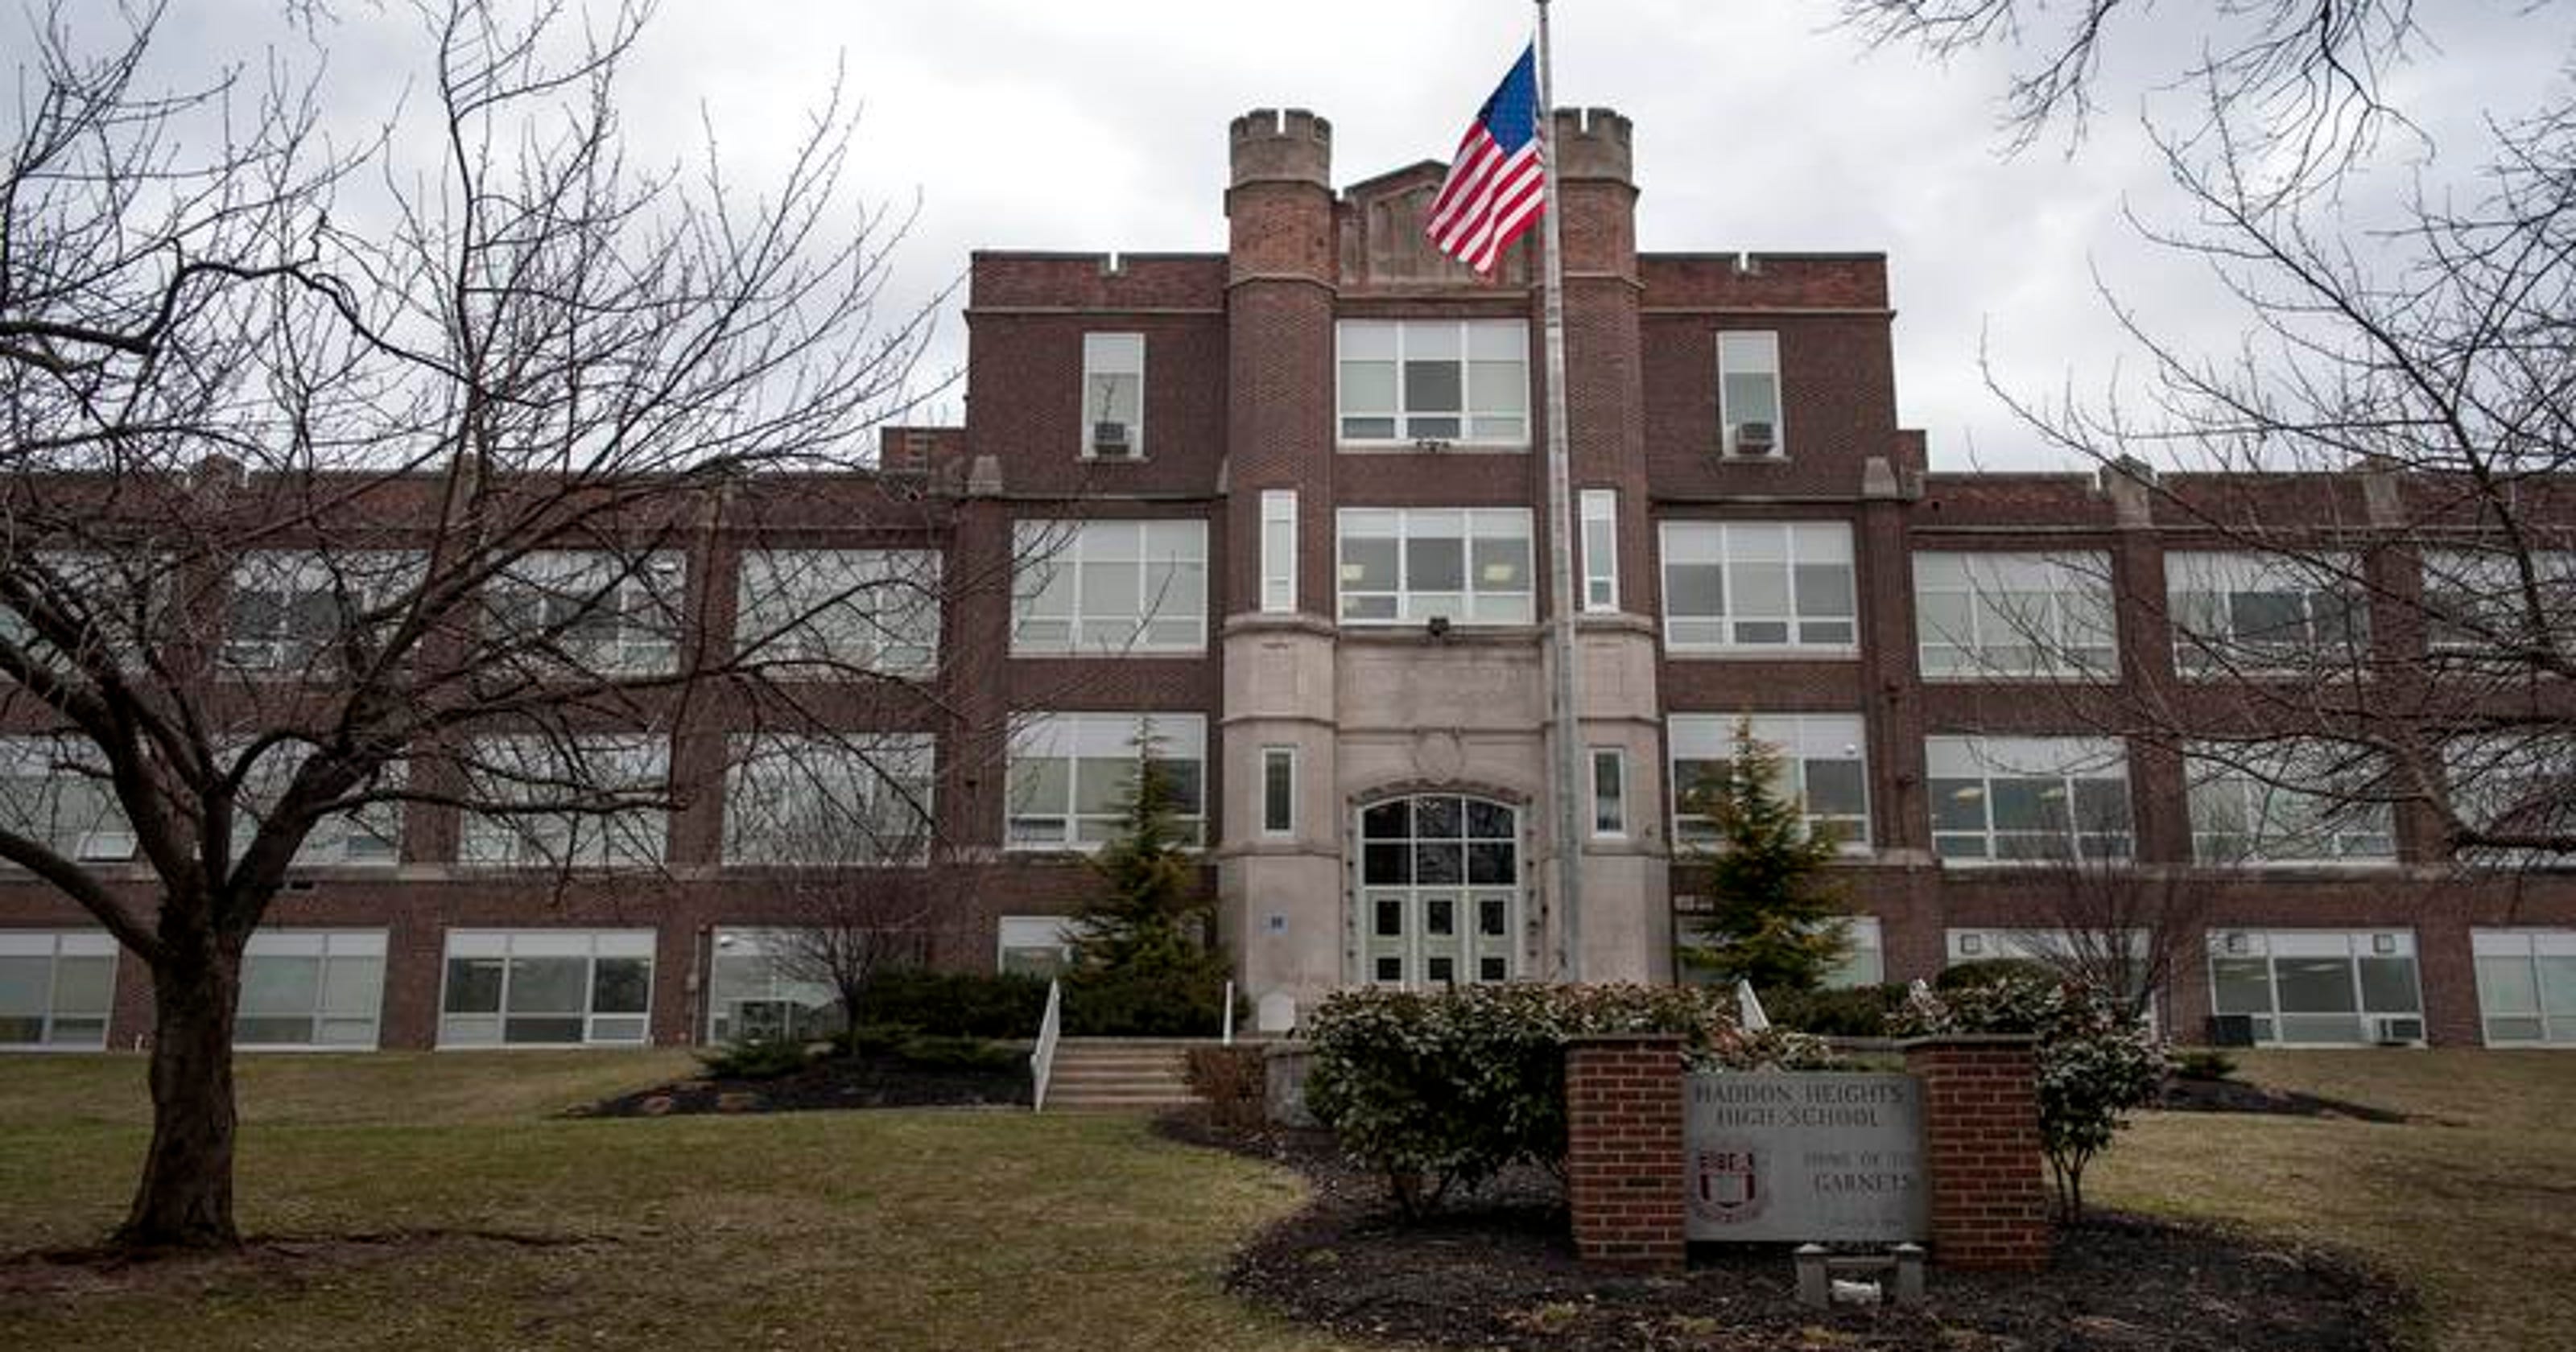 Haddon Heights school district’s attendance policy subject of teen’s